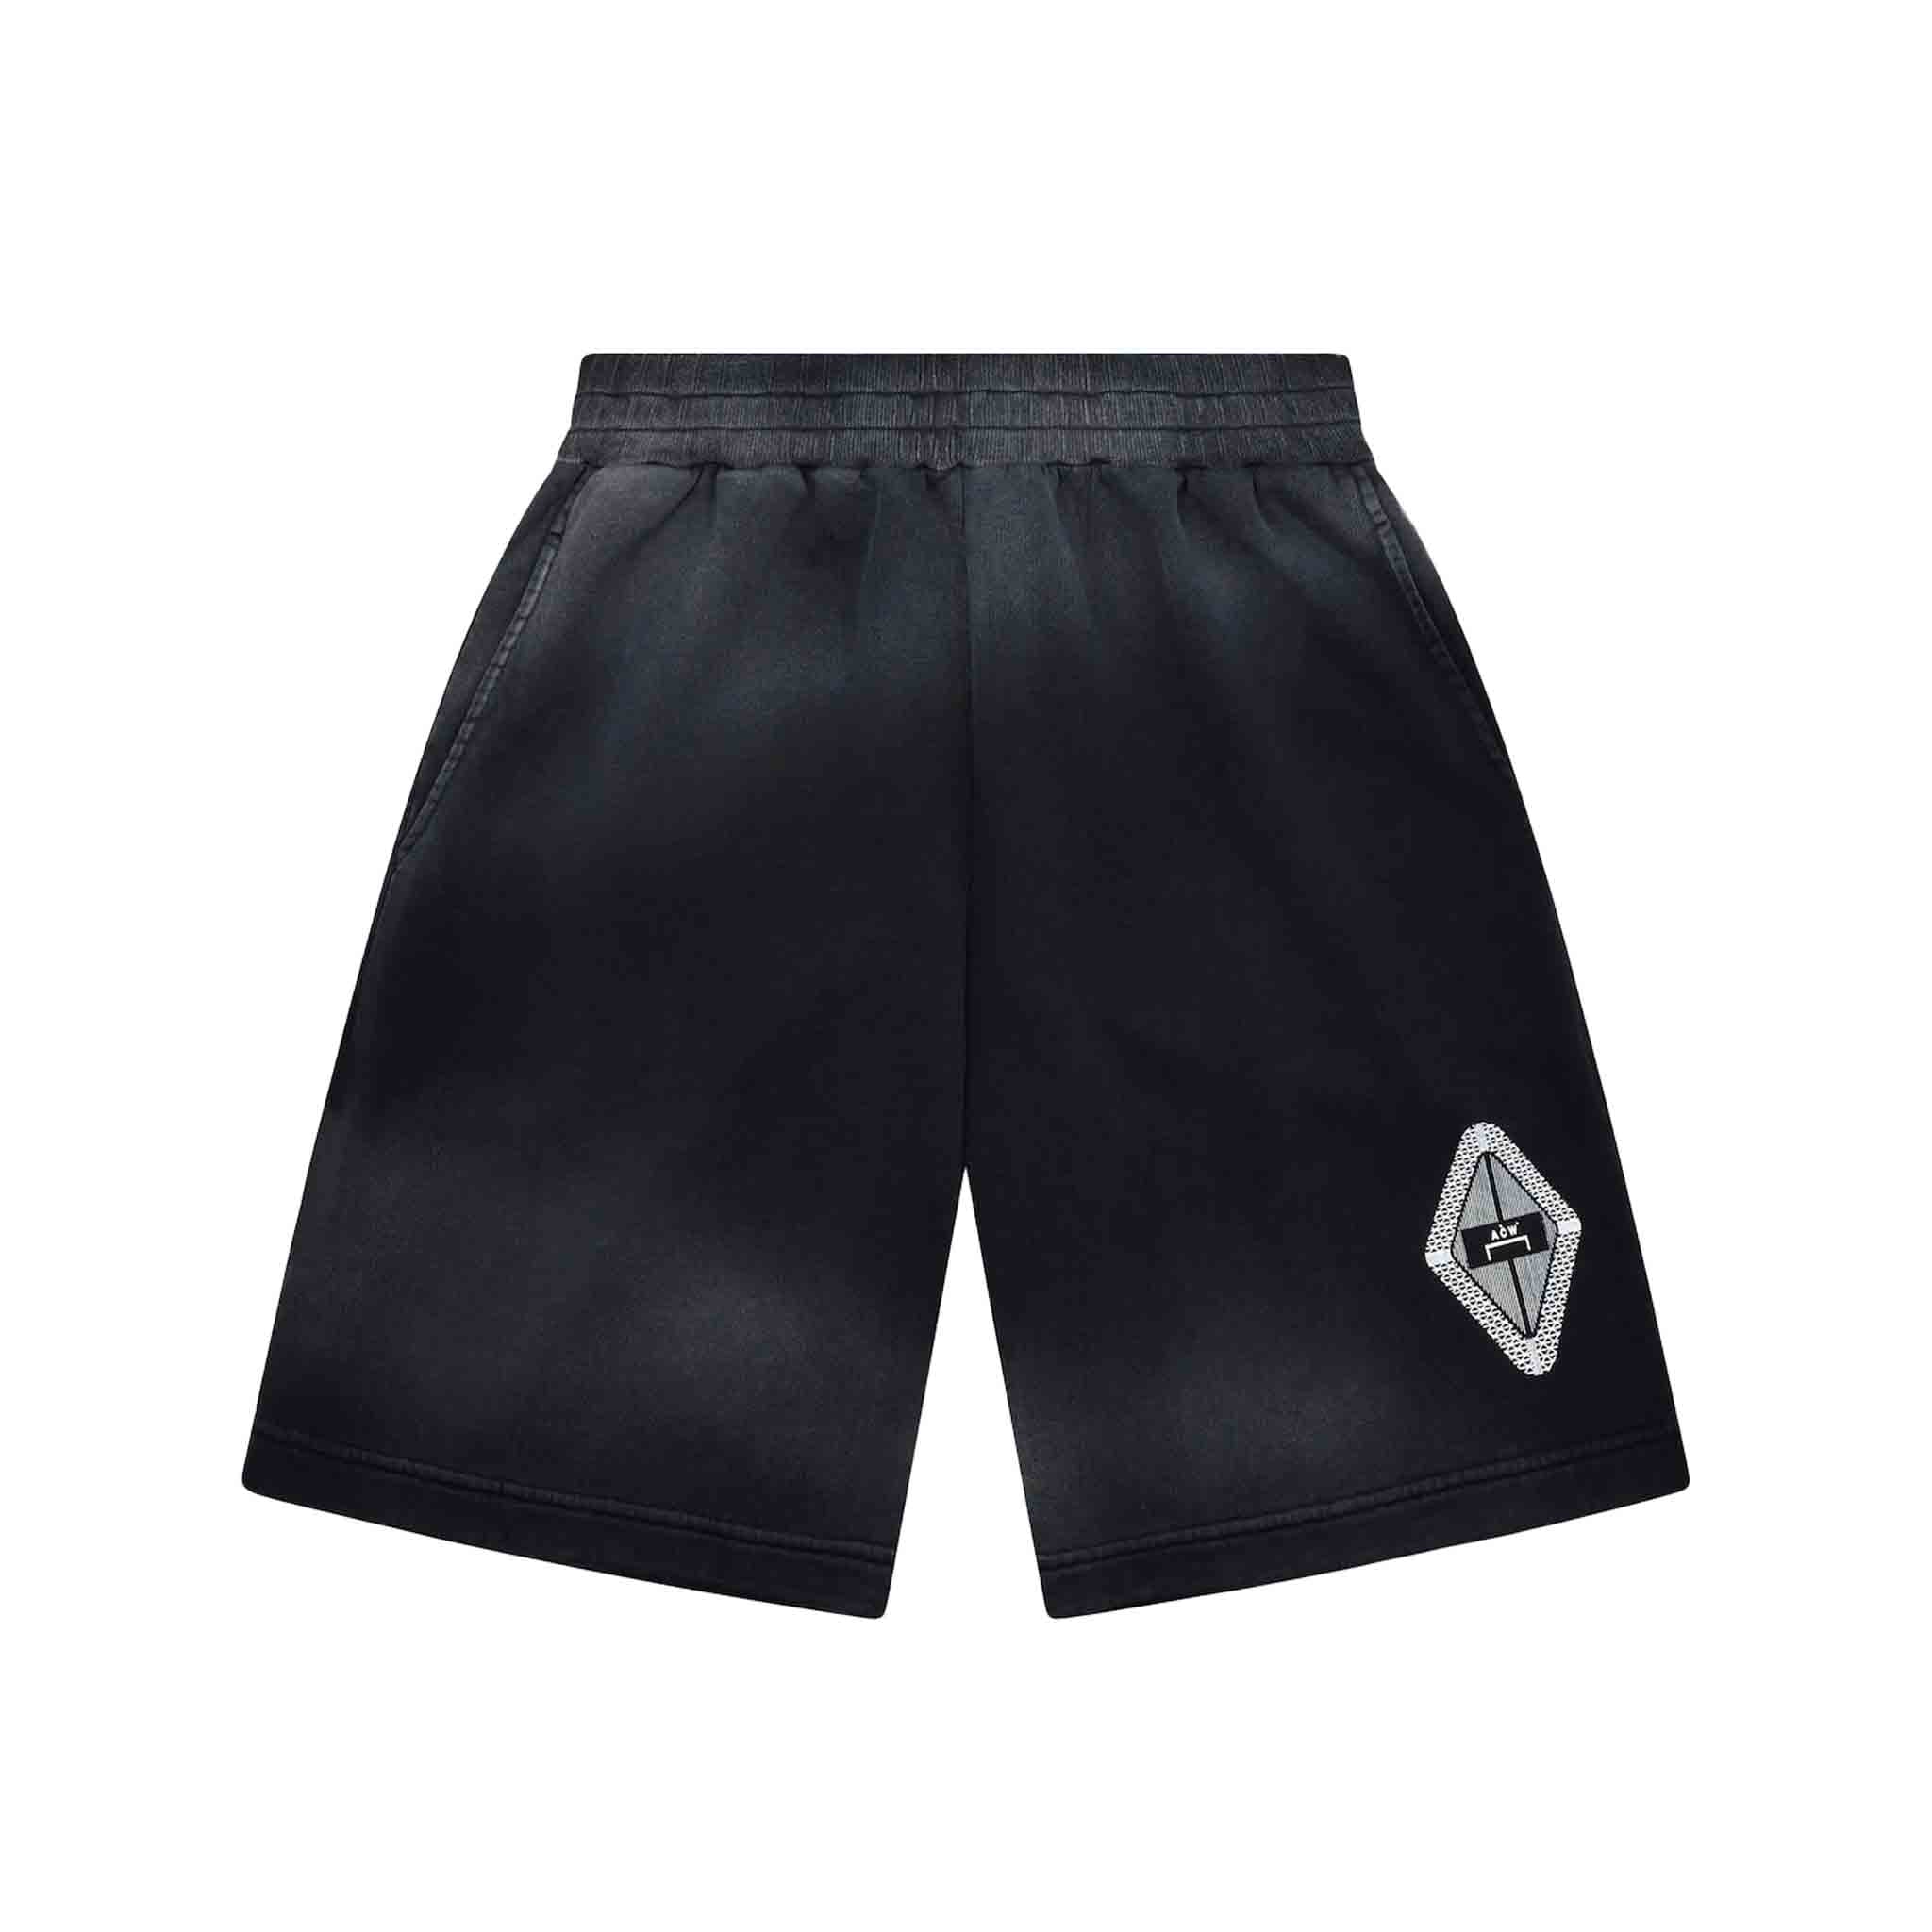 A-COLD-WALL* Vertex Jersey Short in Black